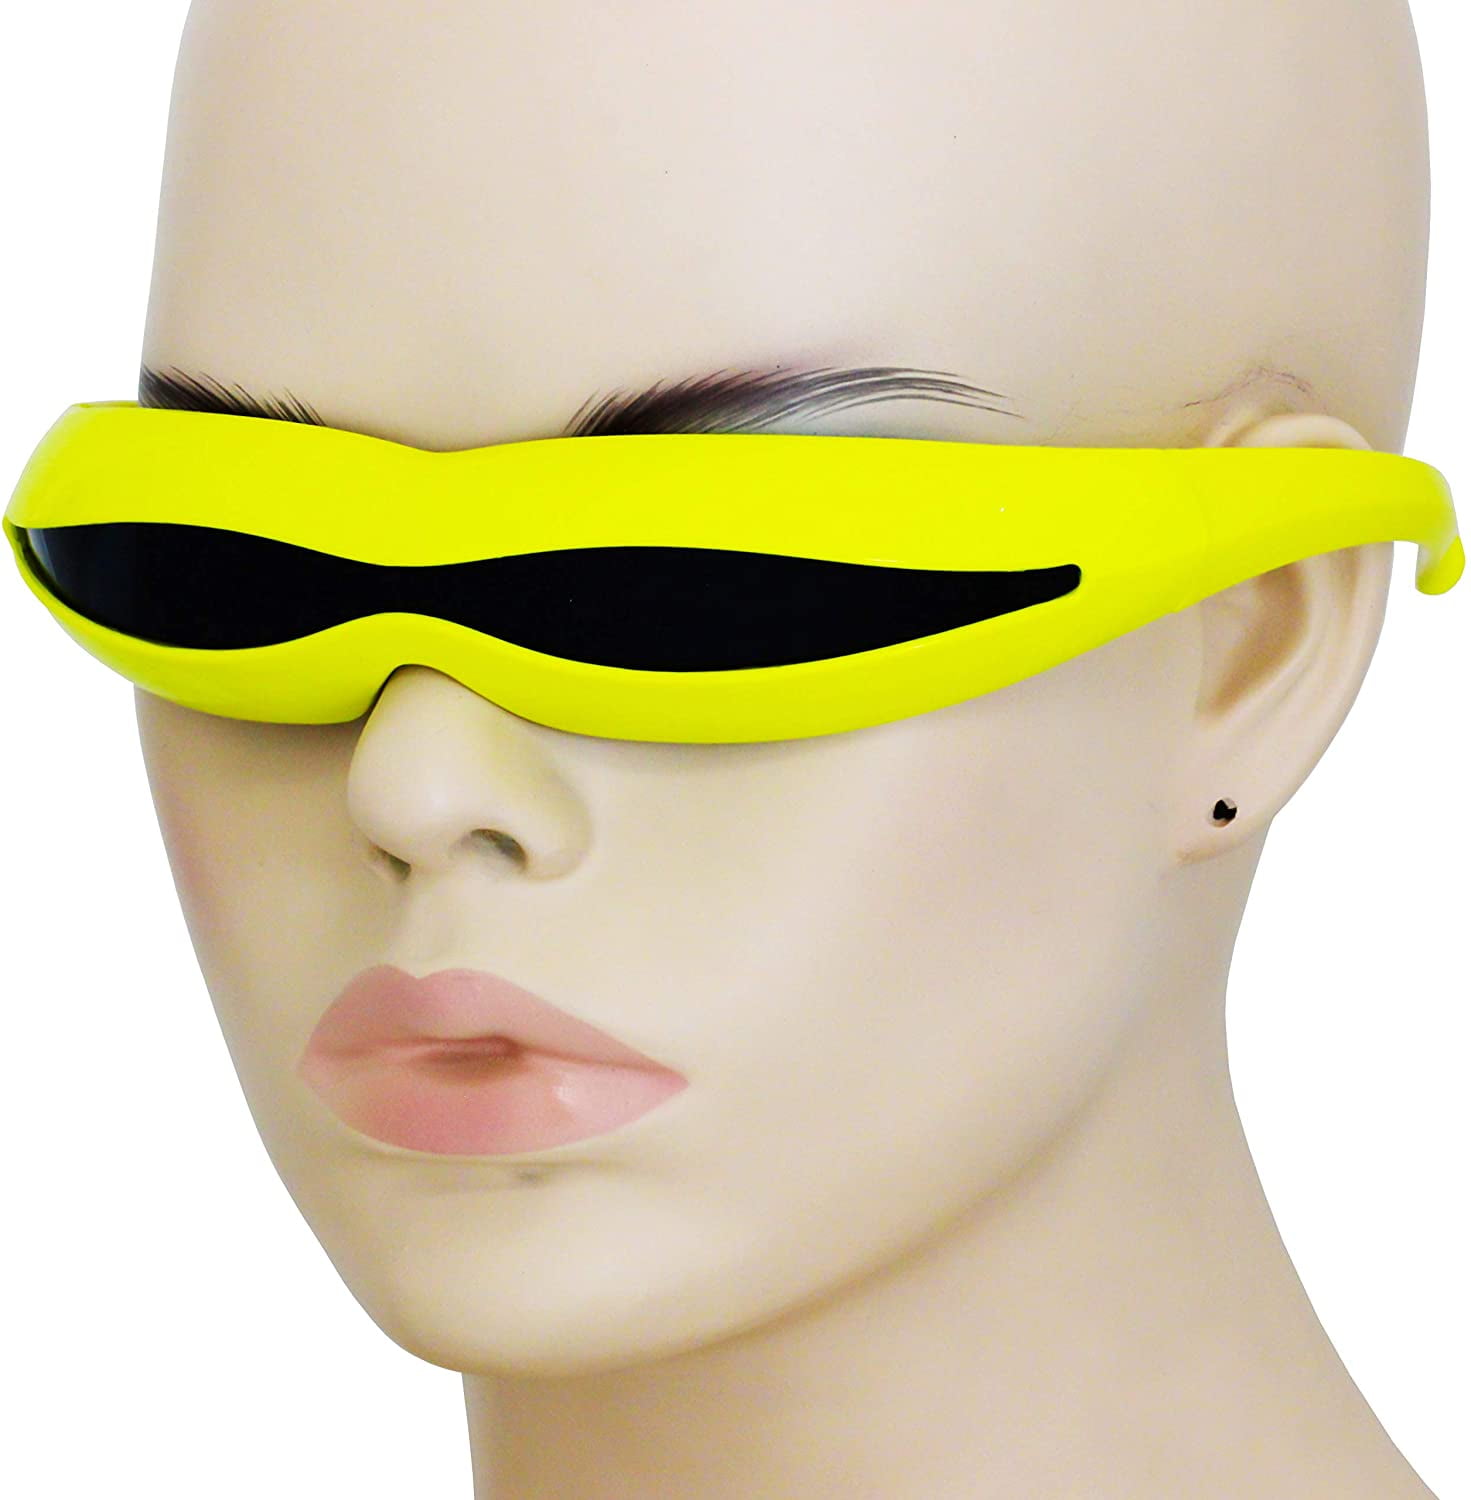 SPACE ROBOT PARTY RAVE COSTUME CYCLOPS FUTURISTIC SHIELD SUN GLASSES White Frame 